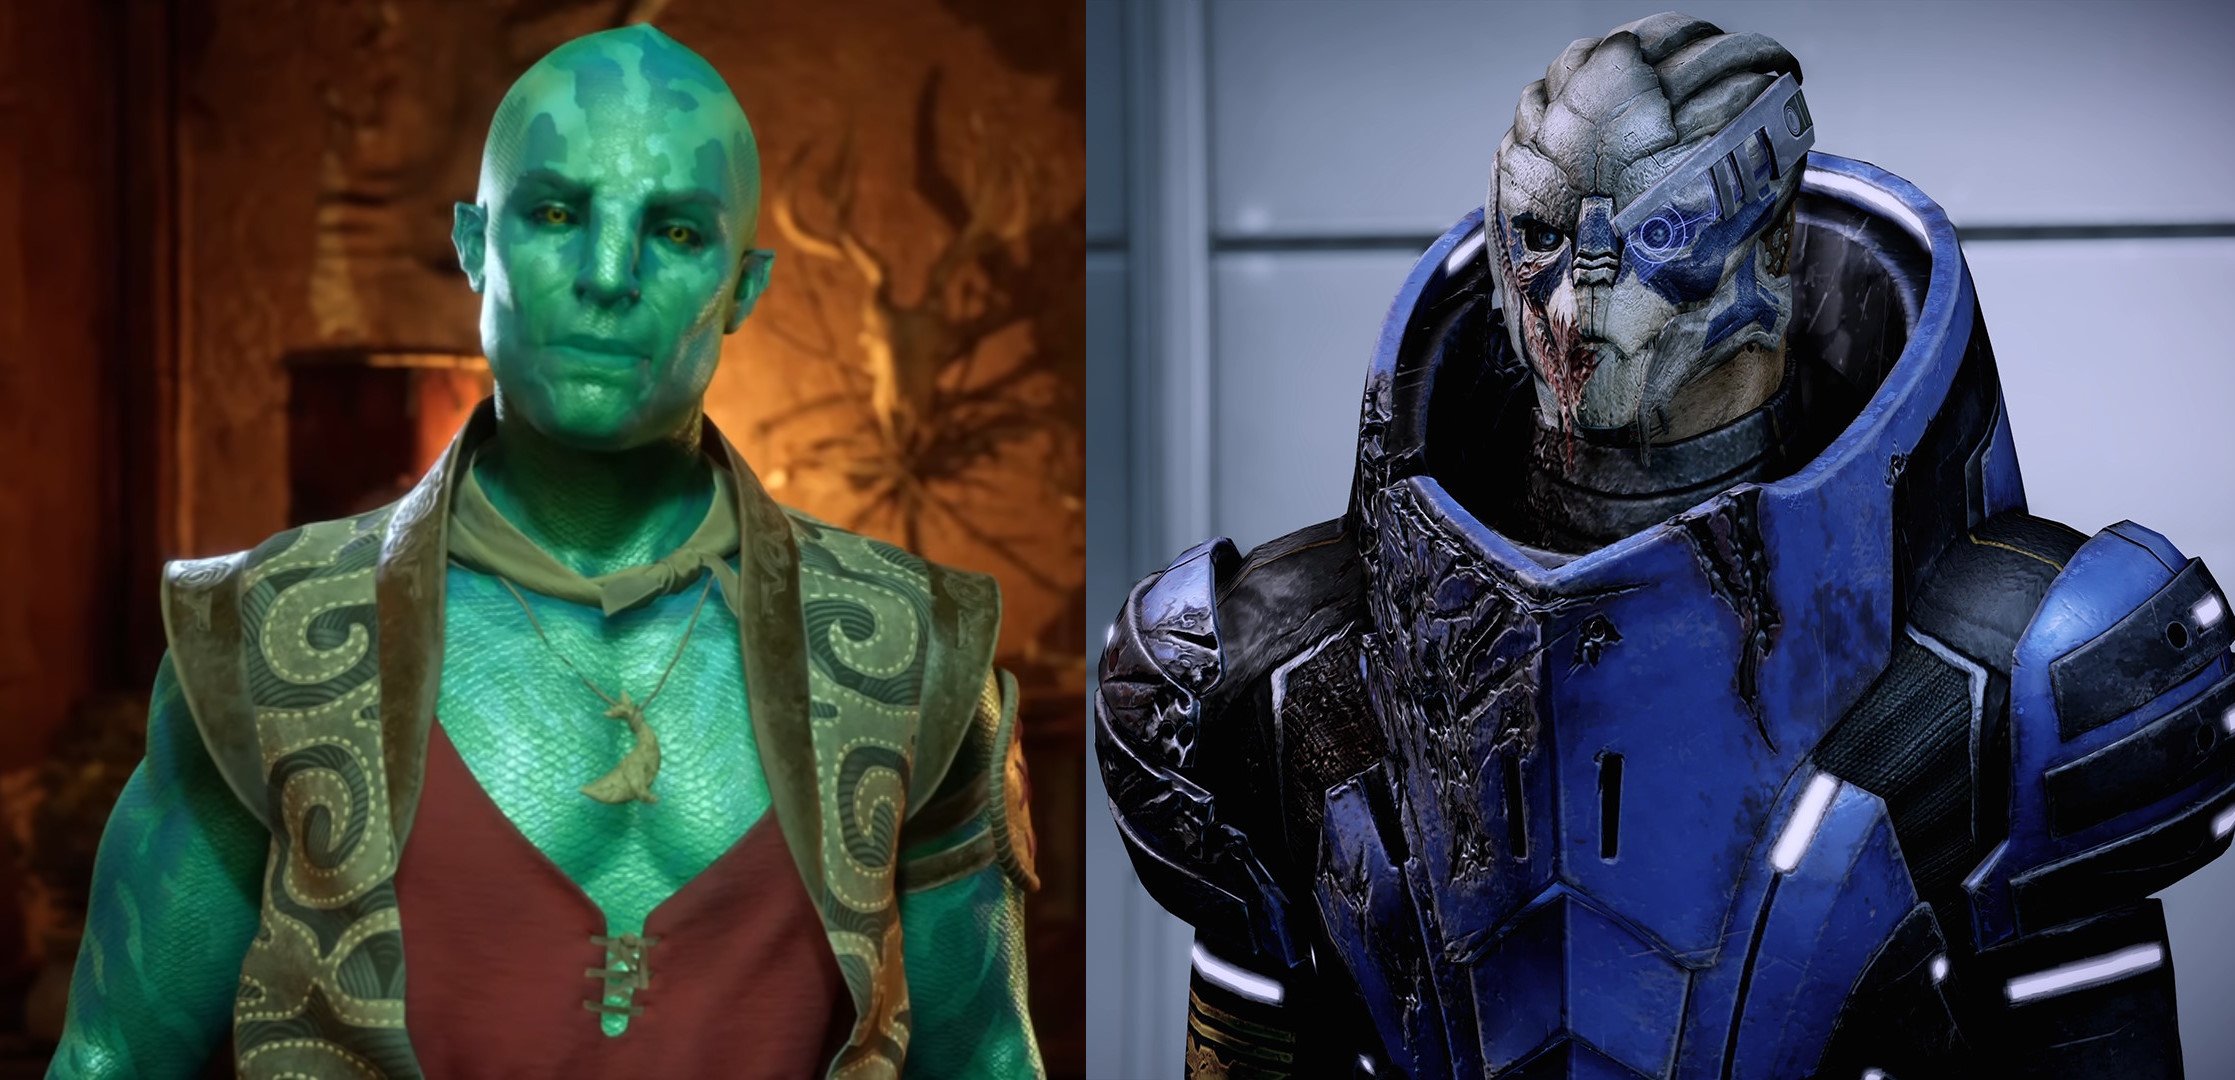 Side-by-side portraits of Kai from Avowed and Garrus Vakarian from Mass Effect